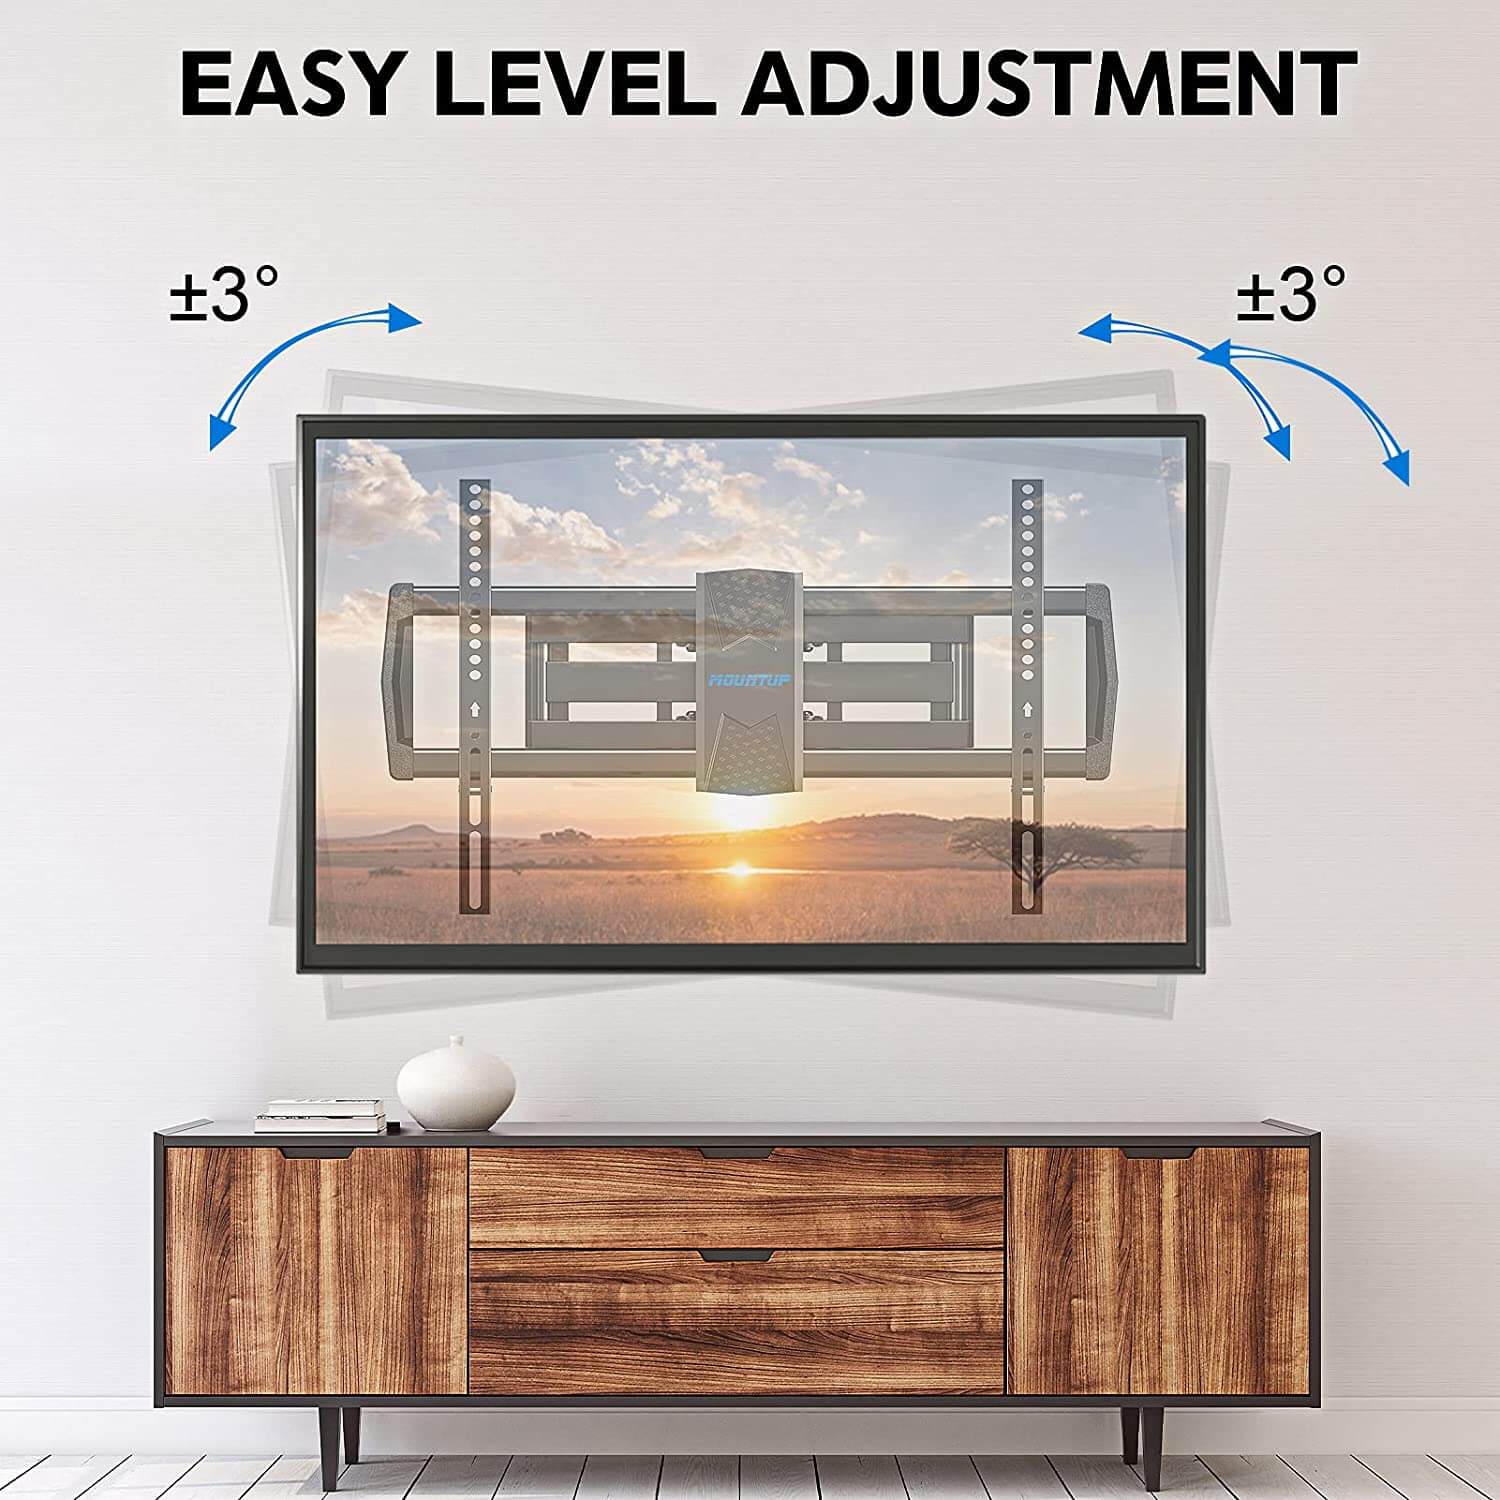 easily and perfectly level the TV after installation